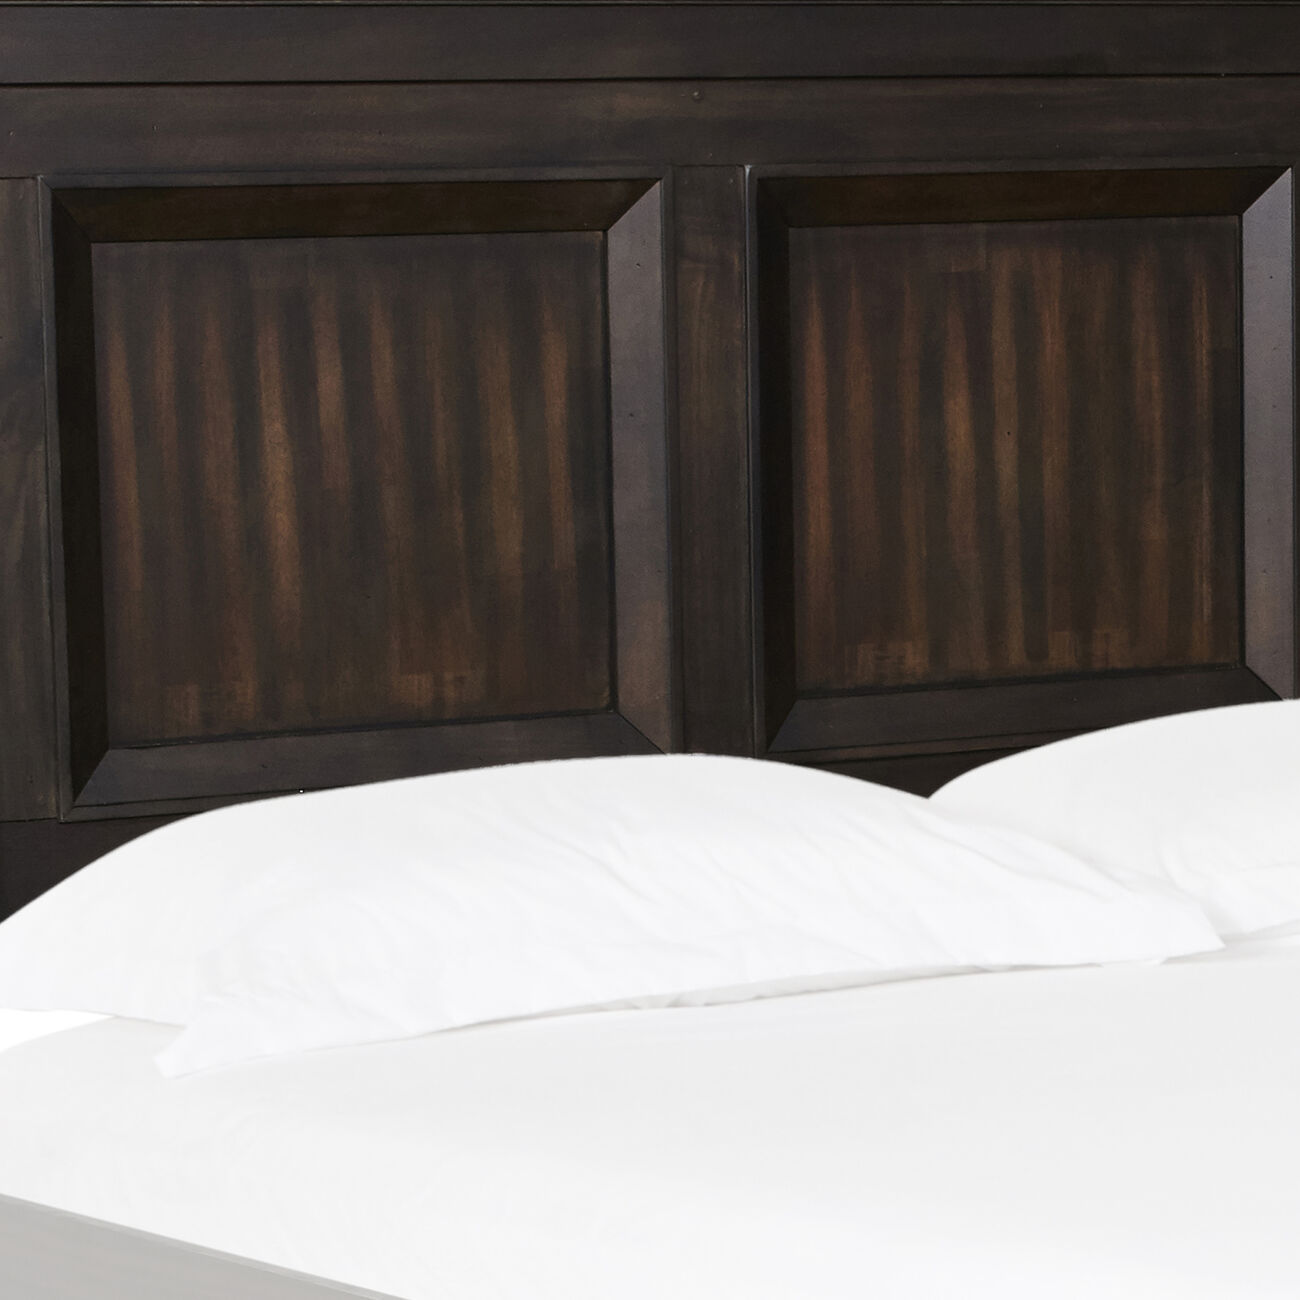 Transitional Wooden Headboard with Molded Details, Brown